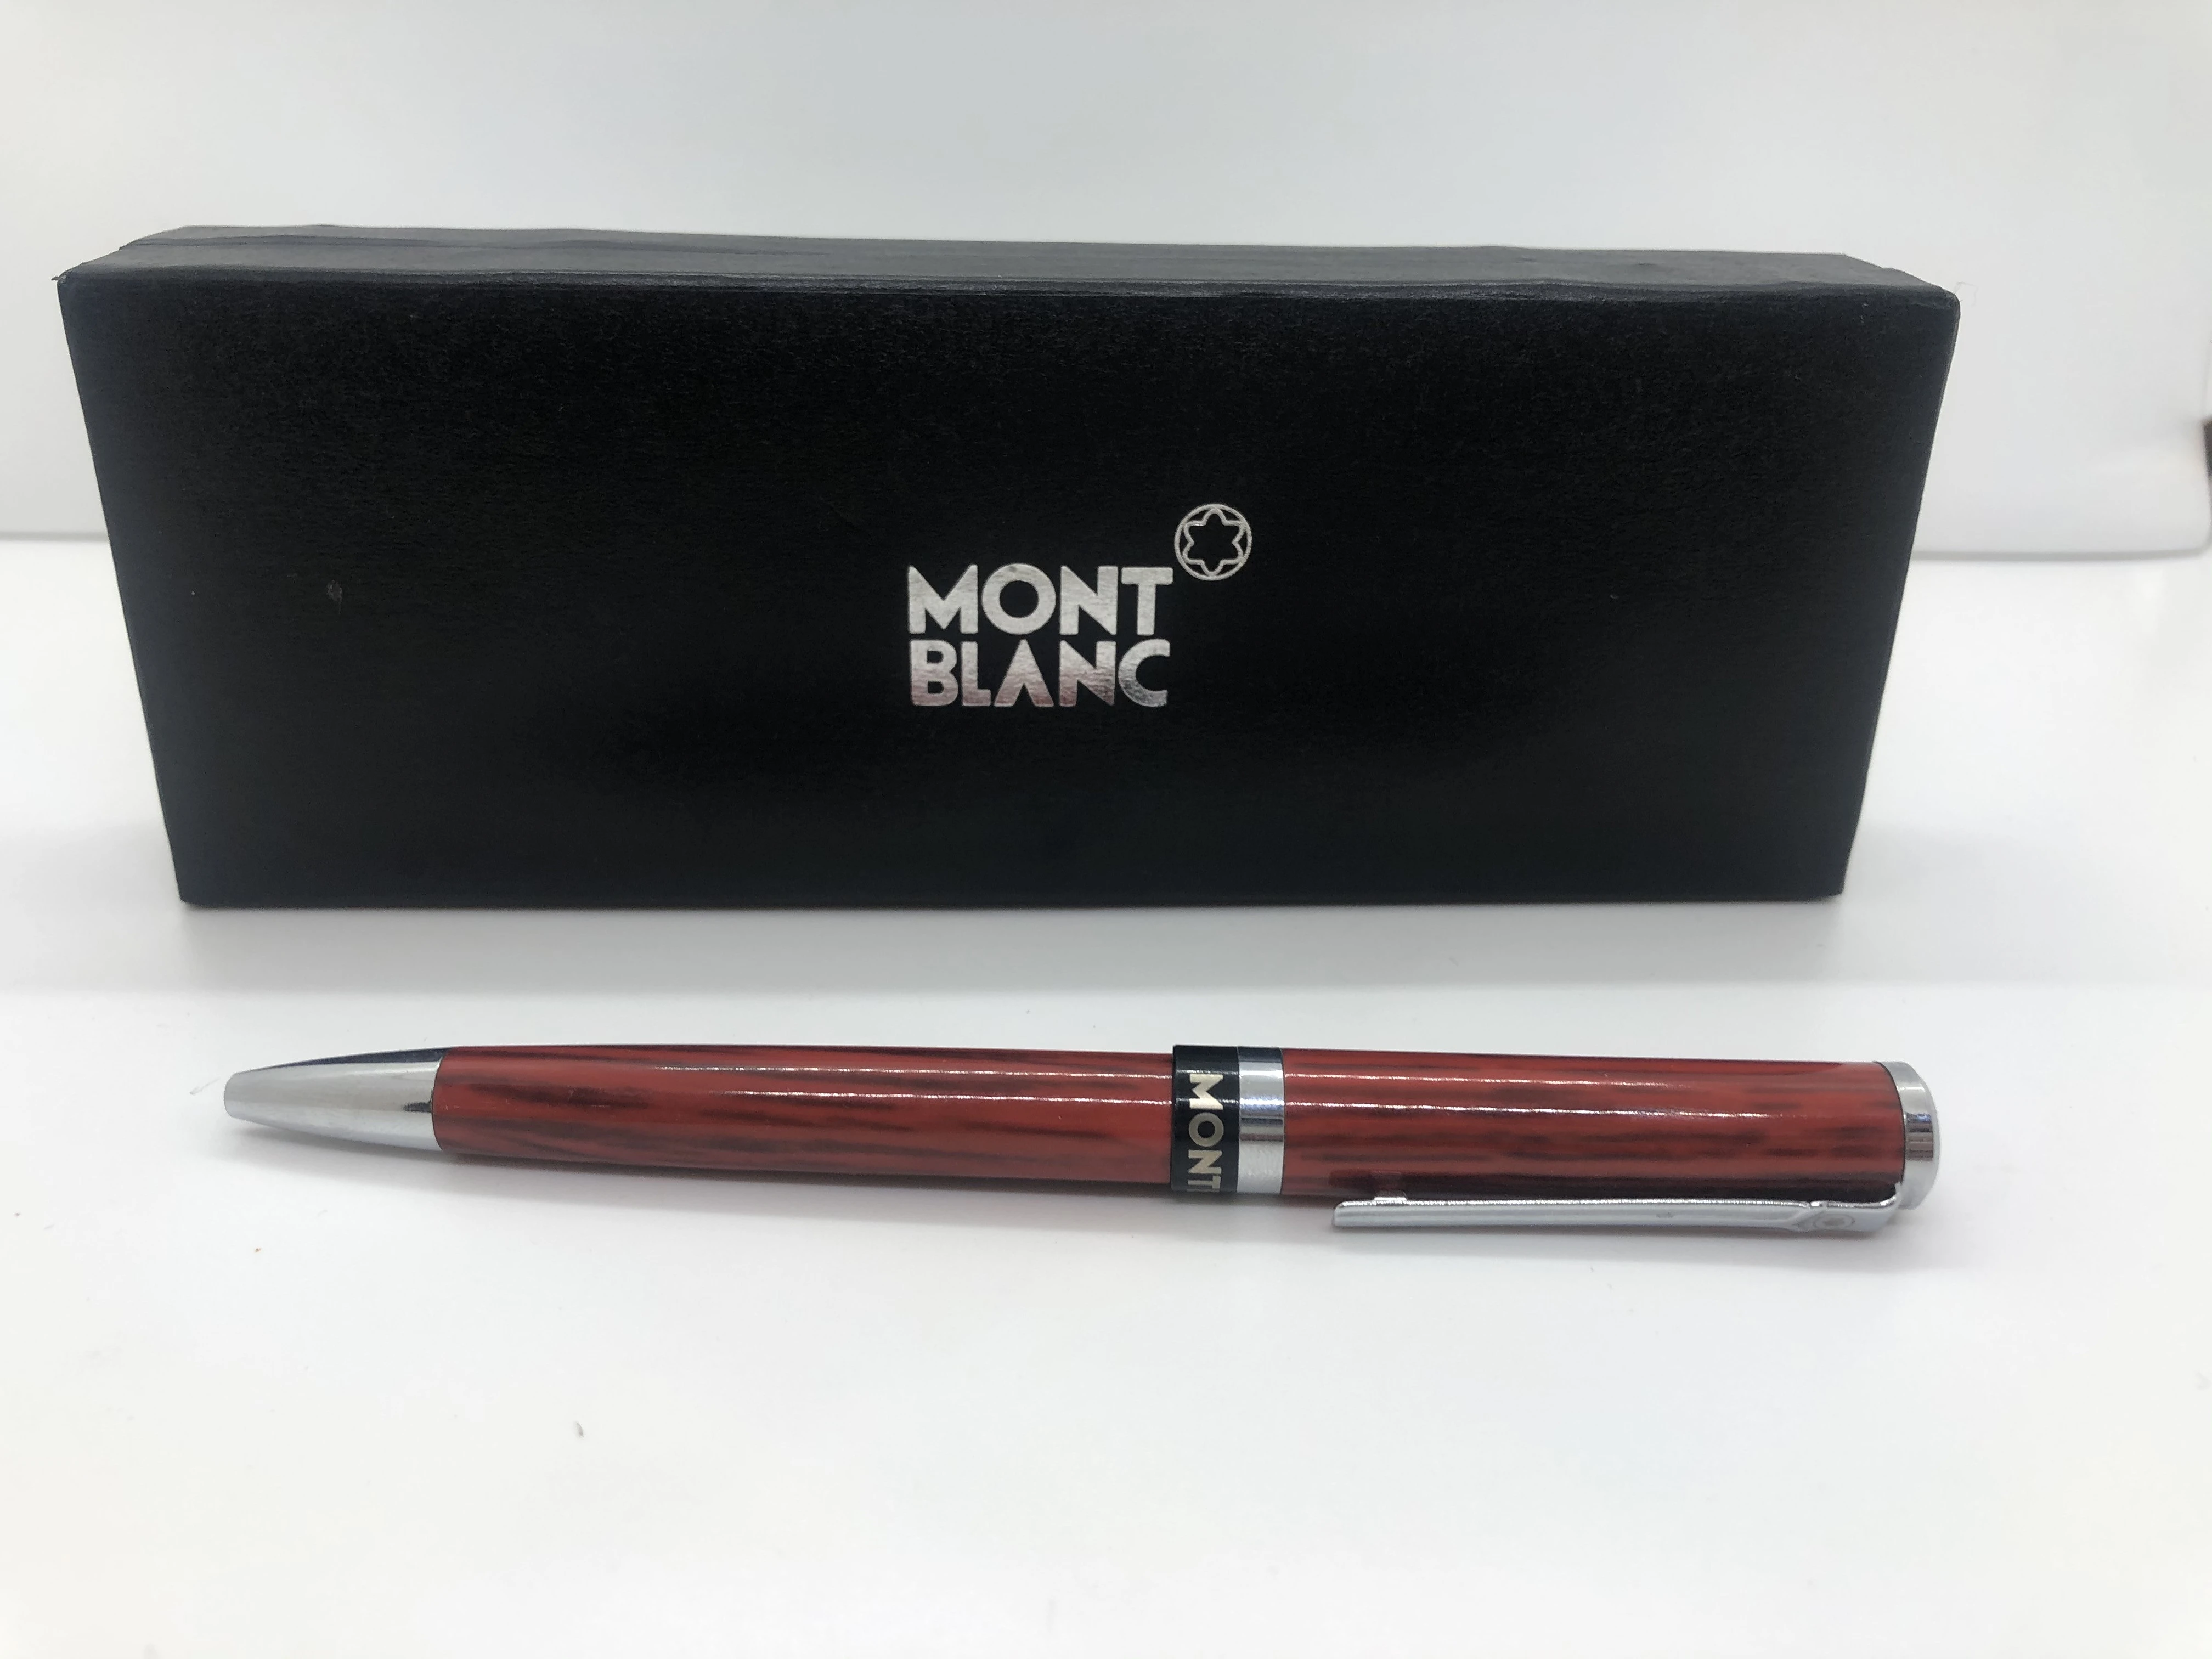 Mont Blanc pen, Burgundy * silver - with engraved touches - with the star brand logo on the top engraved in the rotation